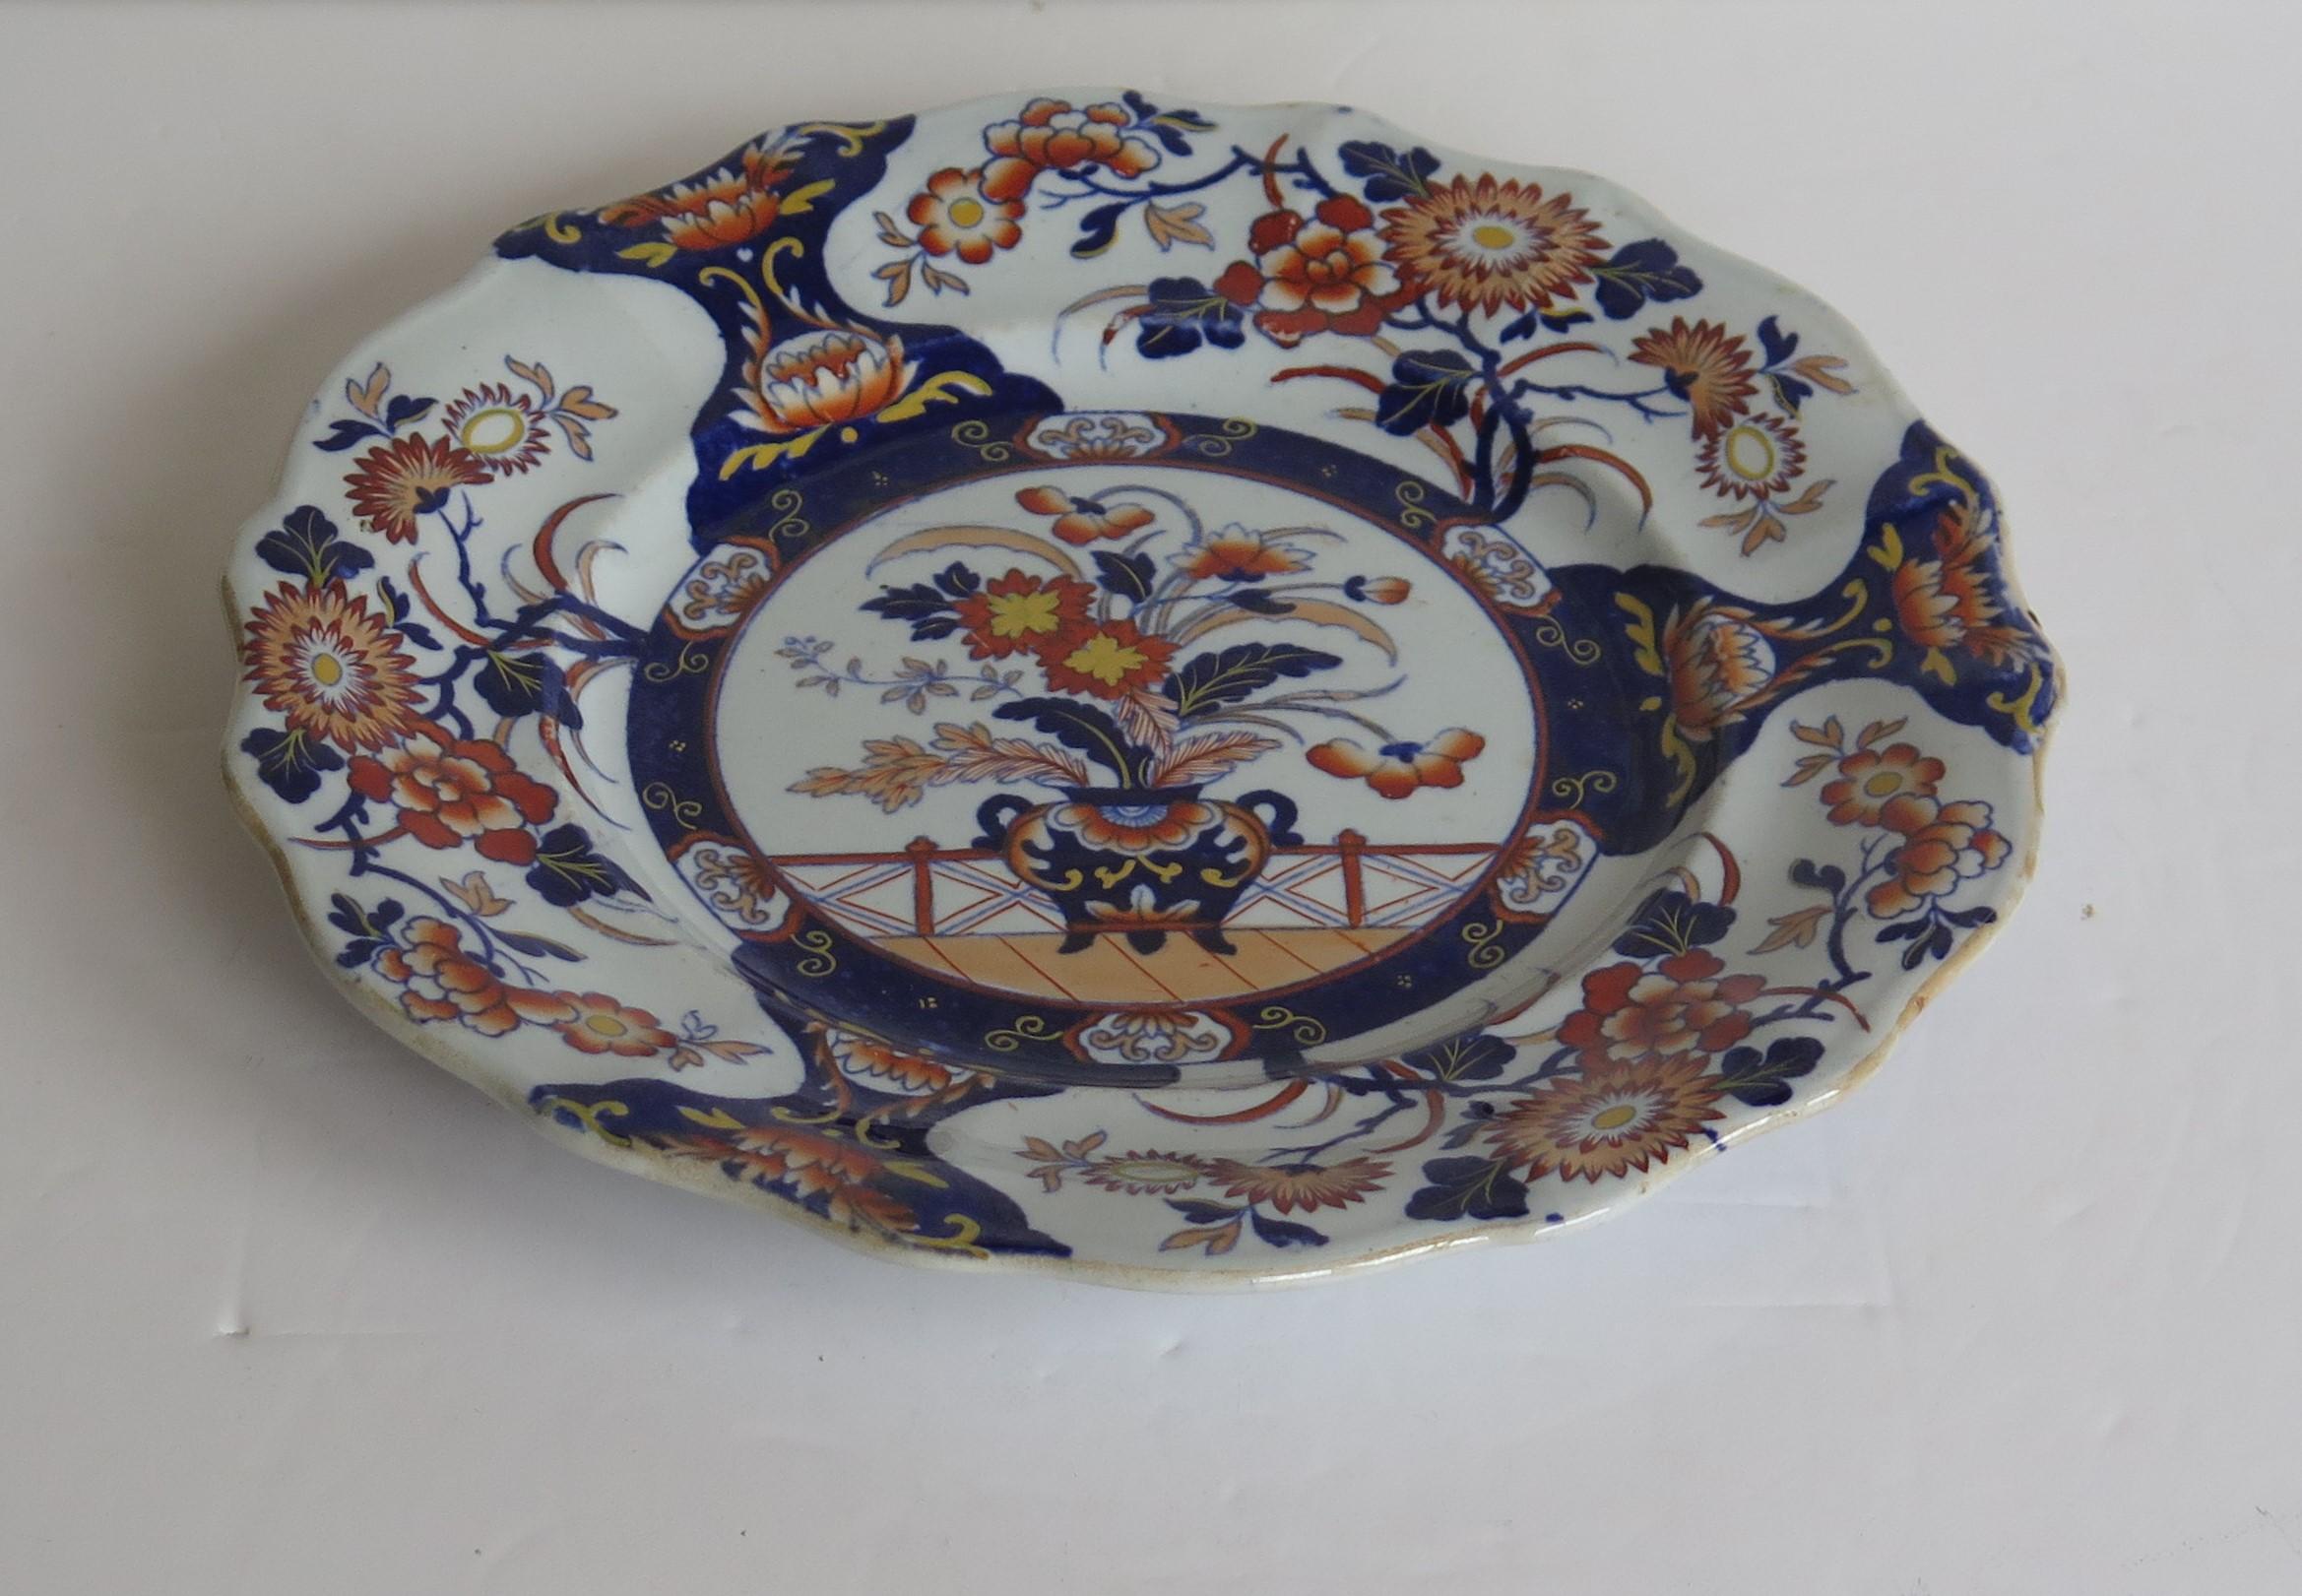 This is a very good mid-19th century Mason’s ironstone dinner plate produced at the time when Mason's was owned and controlled by George L Ashworth after the bankruptcy of C J Mason in 1848.

This plate is decorated in a striking chinoiserie